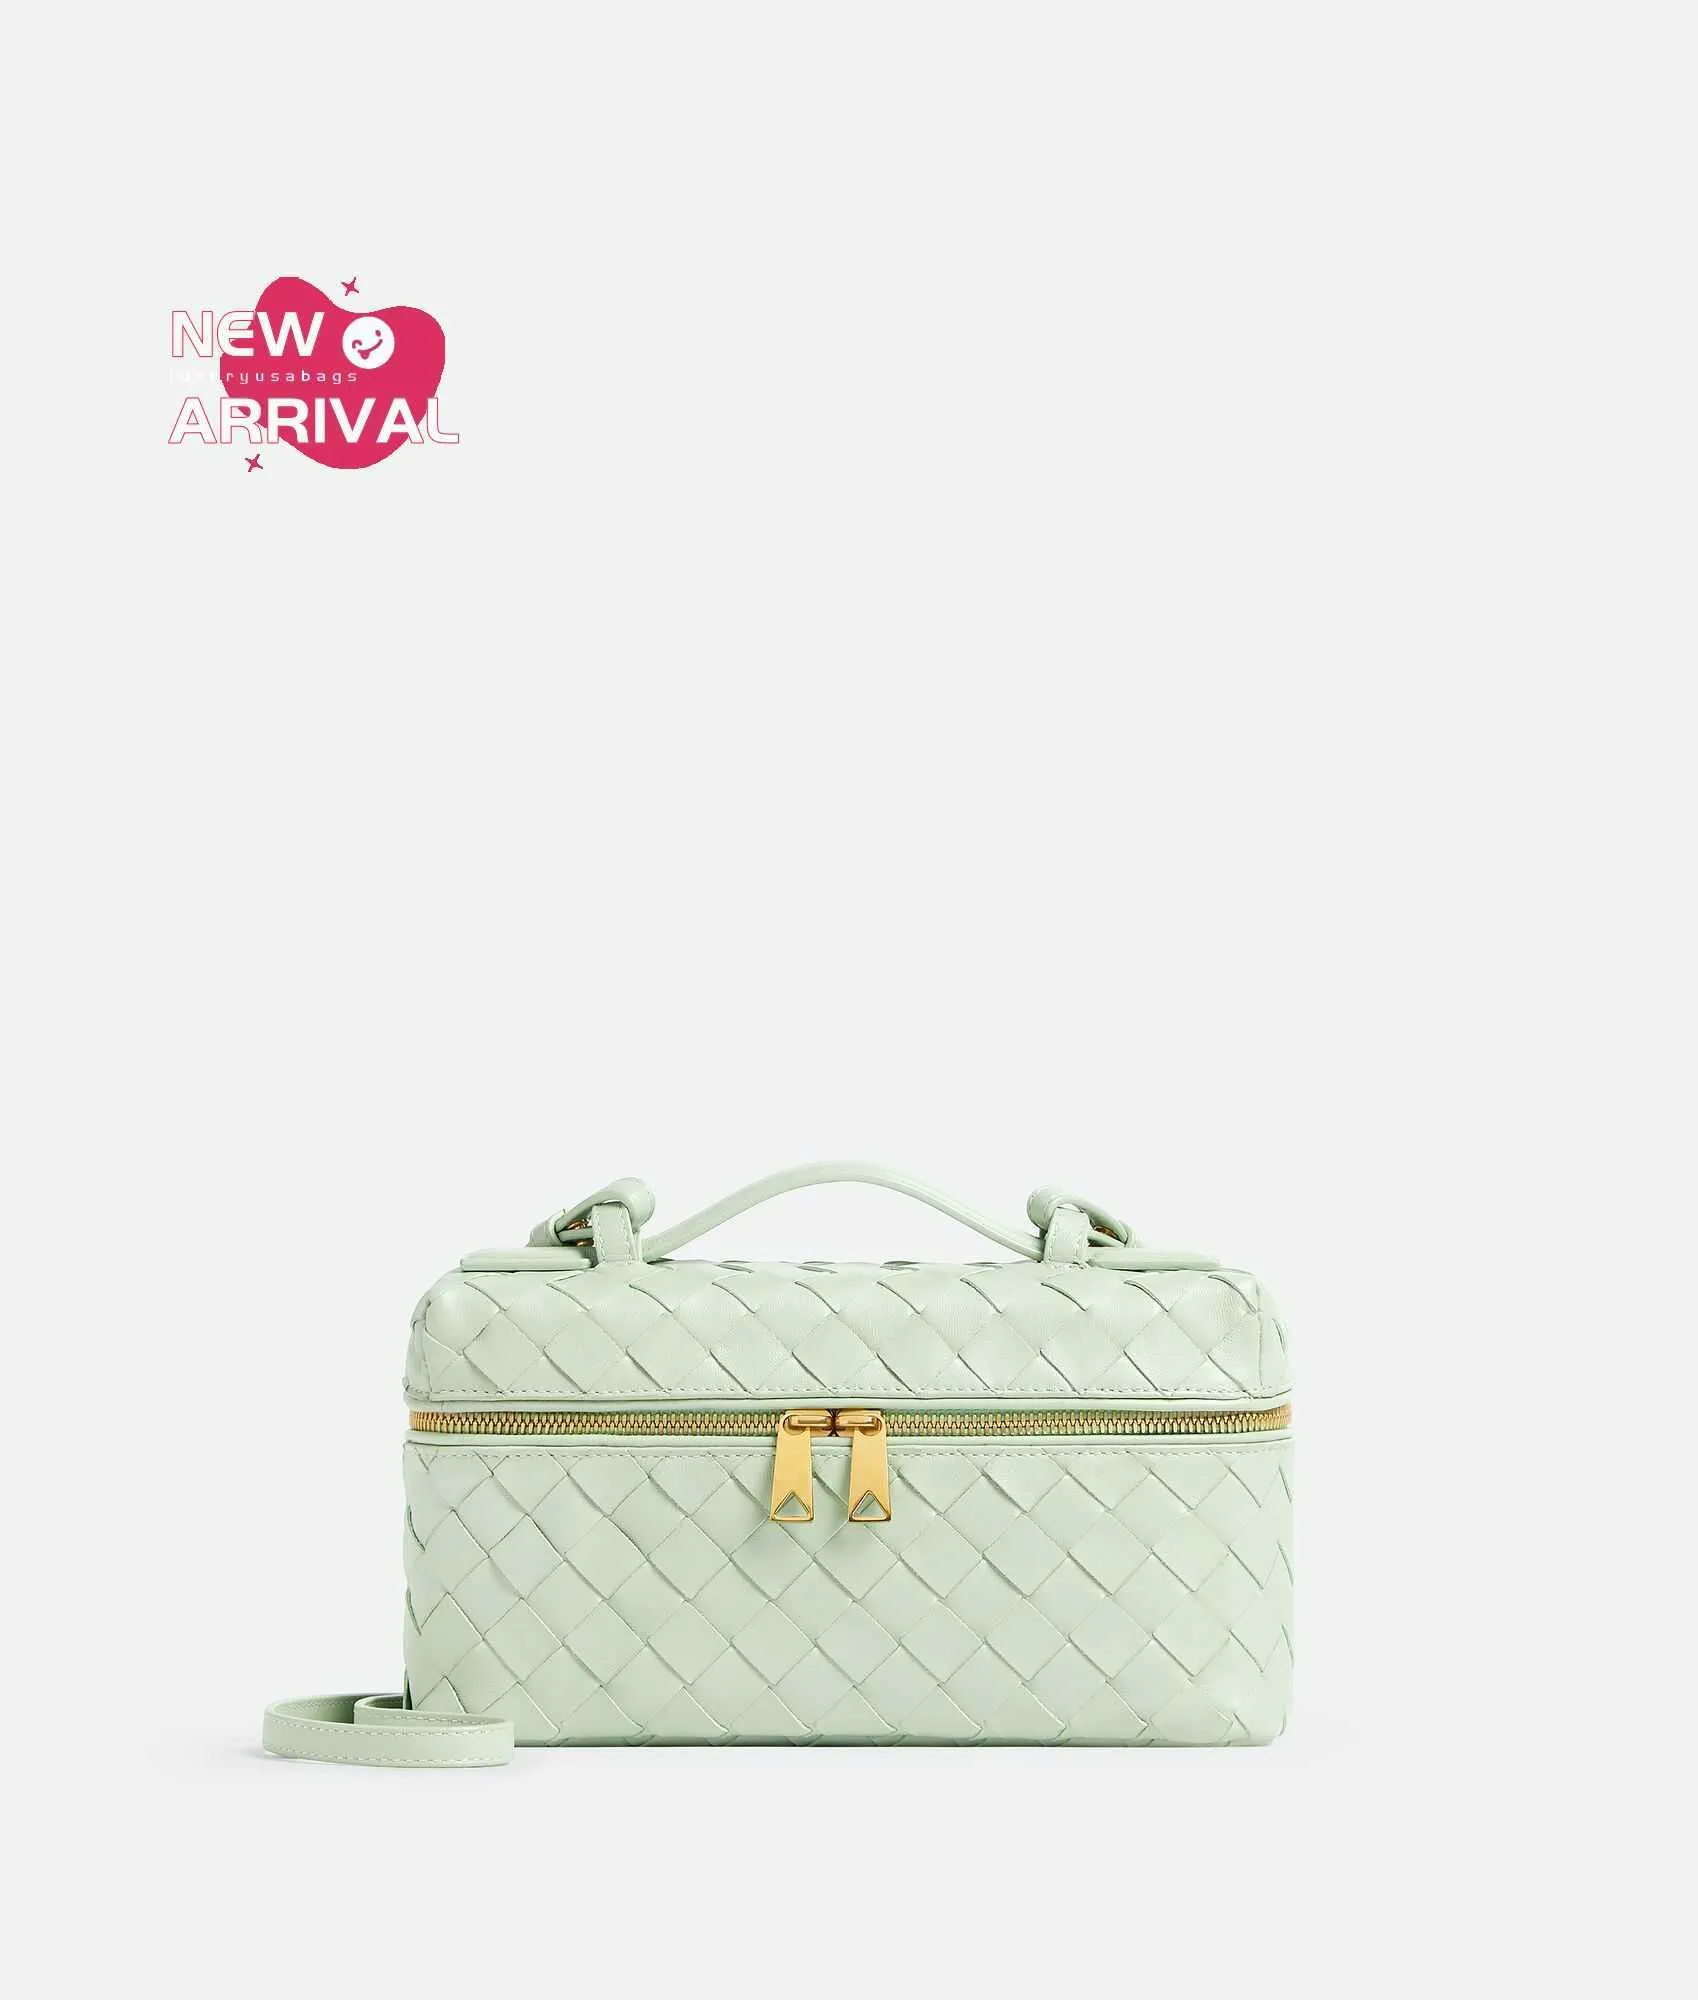 Designer Womens Botega Bang Bang Vanity Case Mint Green Rope Bagna Cowhide Weaving Holly Intreciato Leather Vanity Case con cinturino staccabile